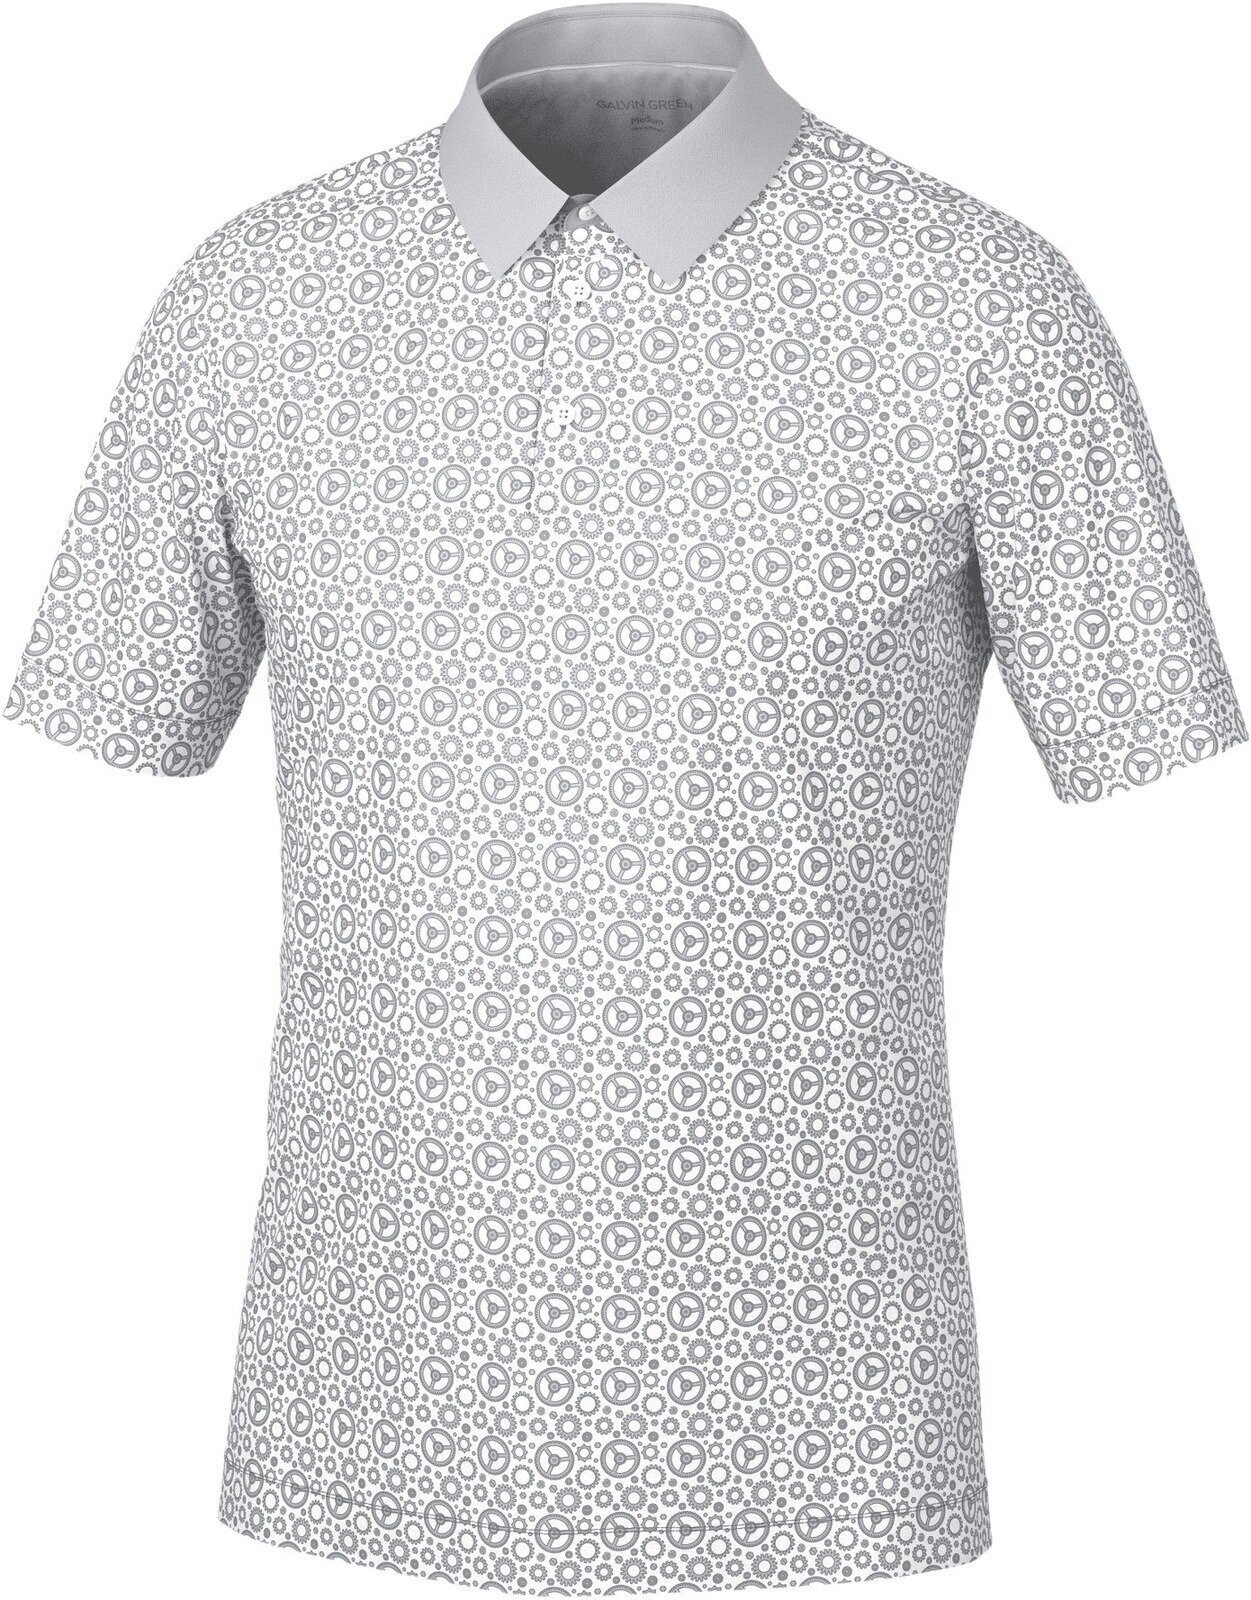 Chemise polo Galvin Green Miracle Mens Polo Shirt White/Cool Grey M